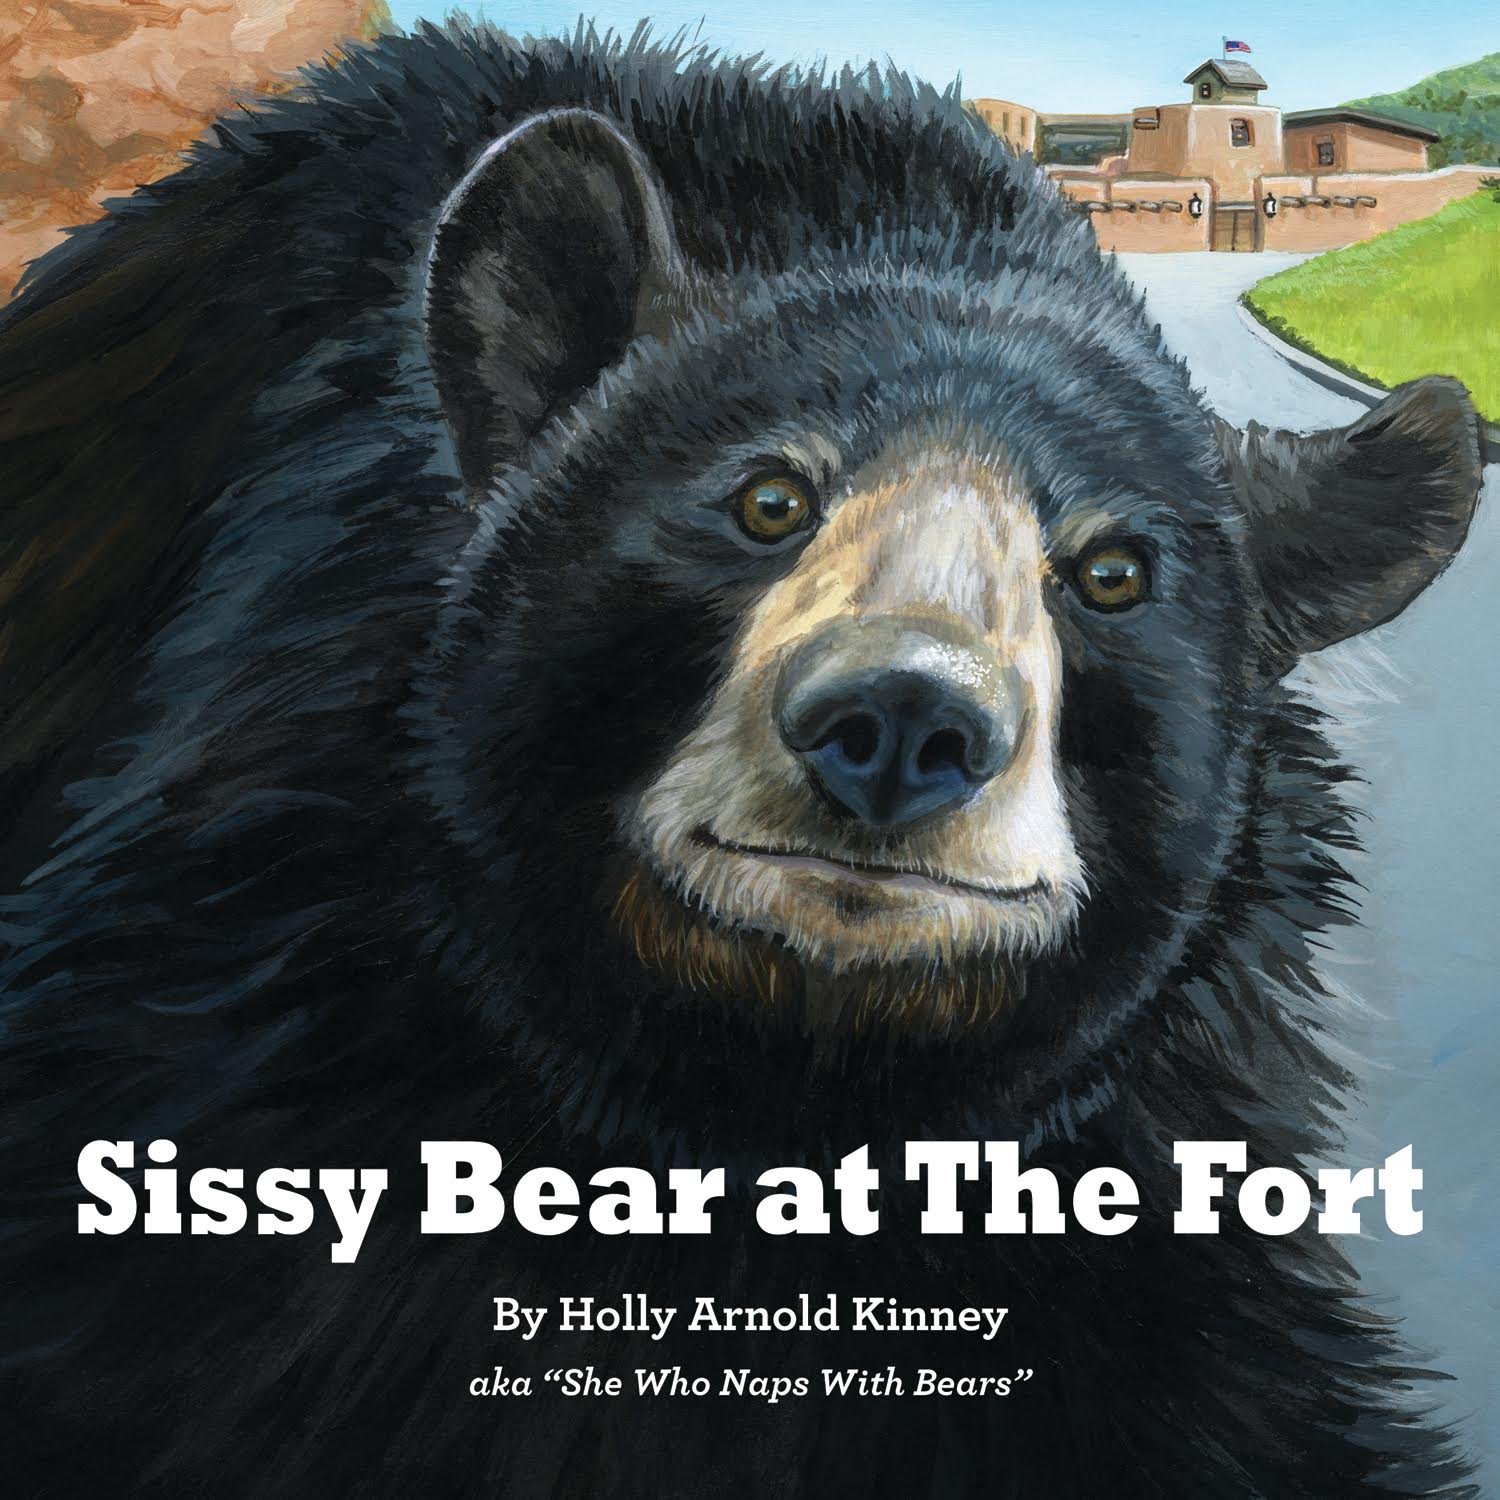 Sissy Bear at The Fort